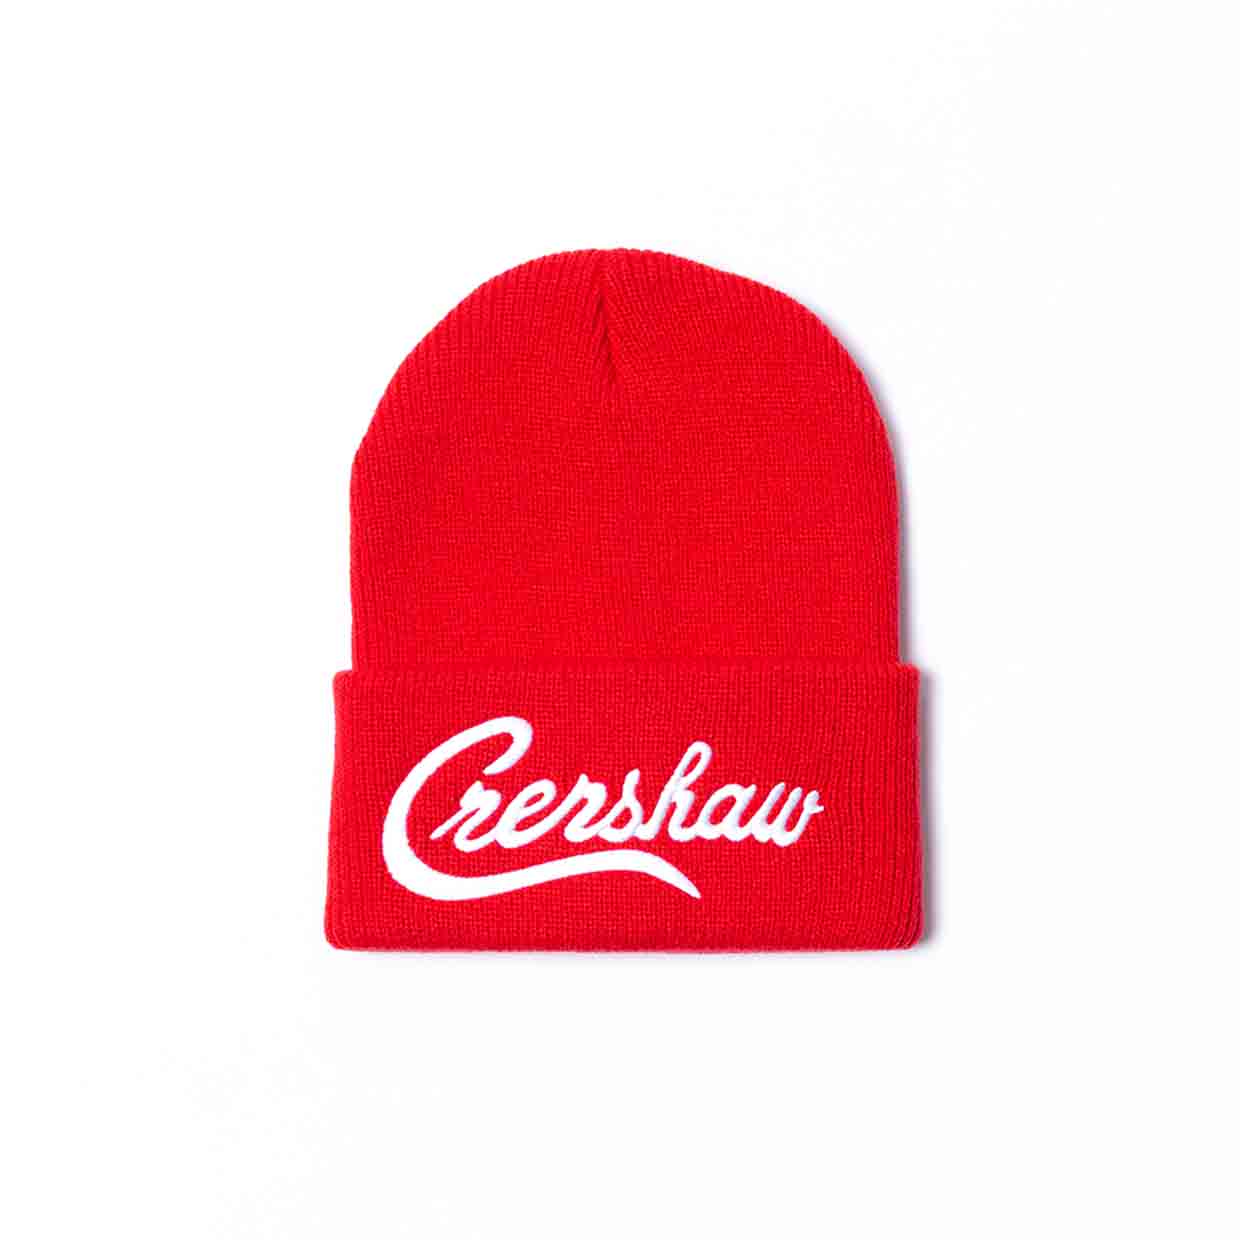 Crenshaw Limited Edition Heavyweight Beanie - Red/White